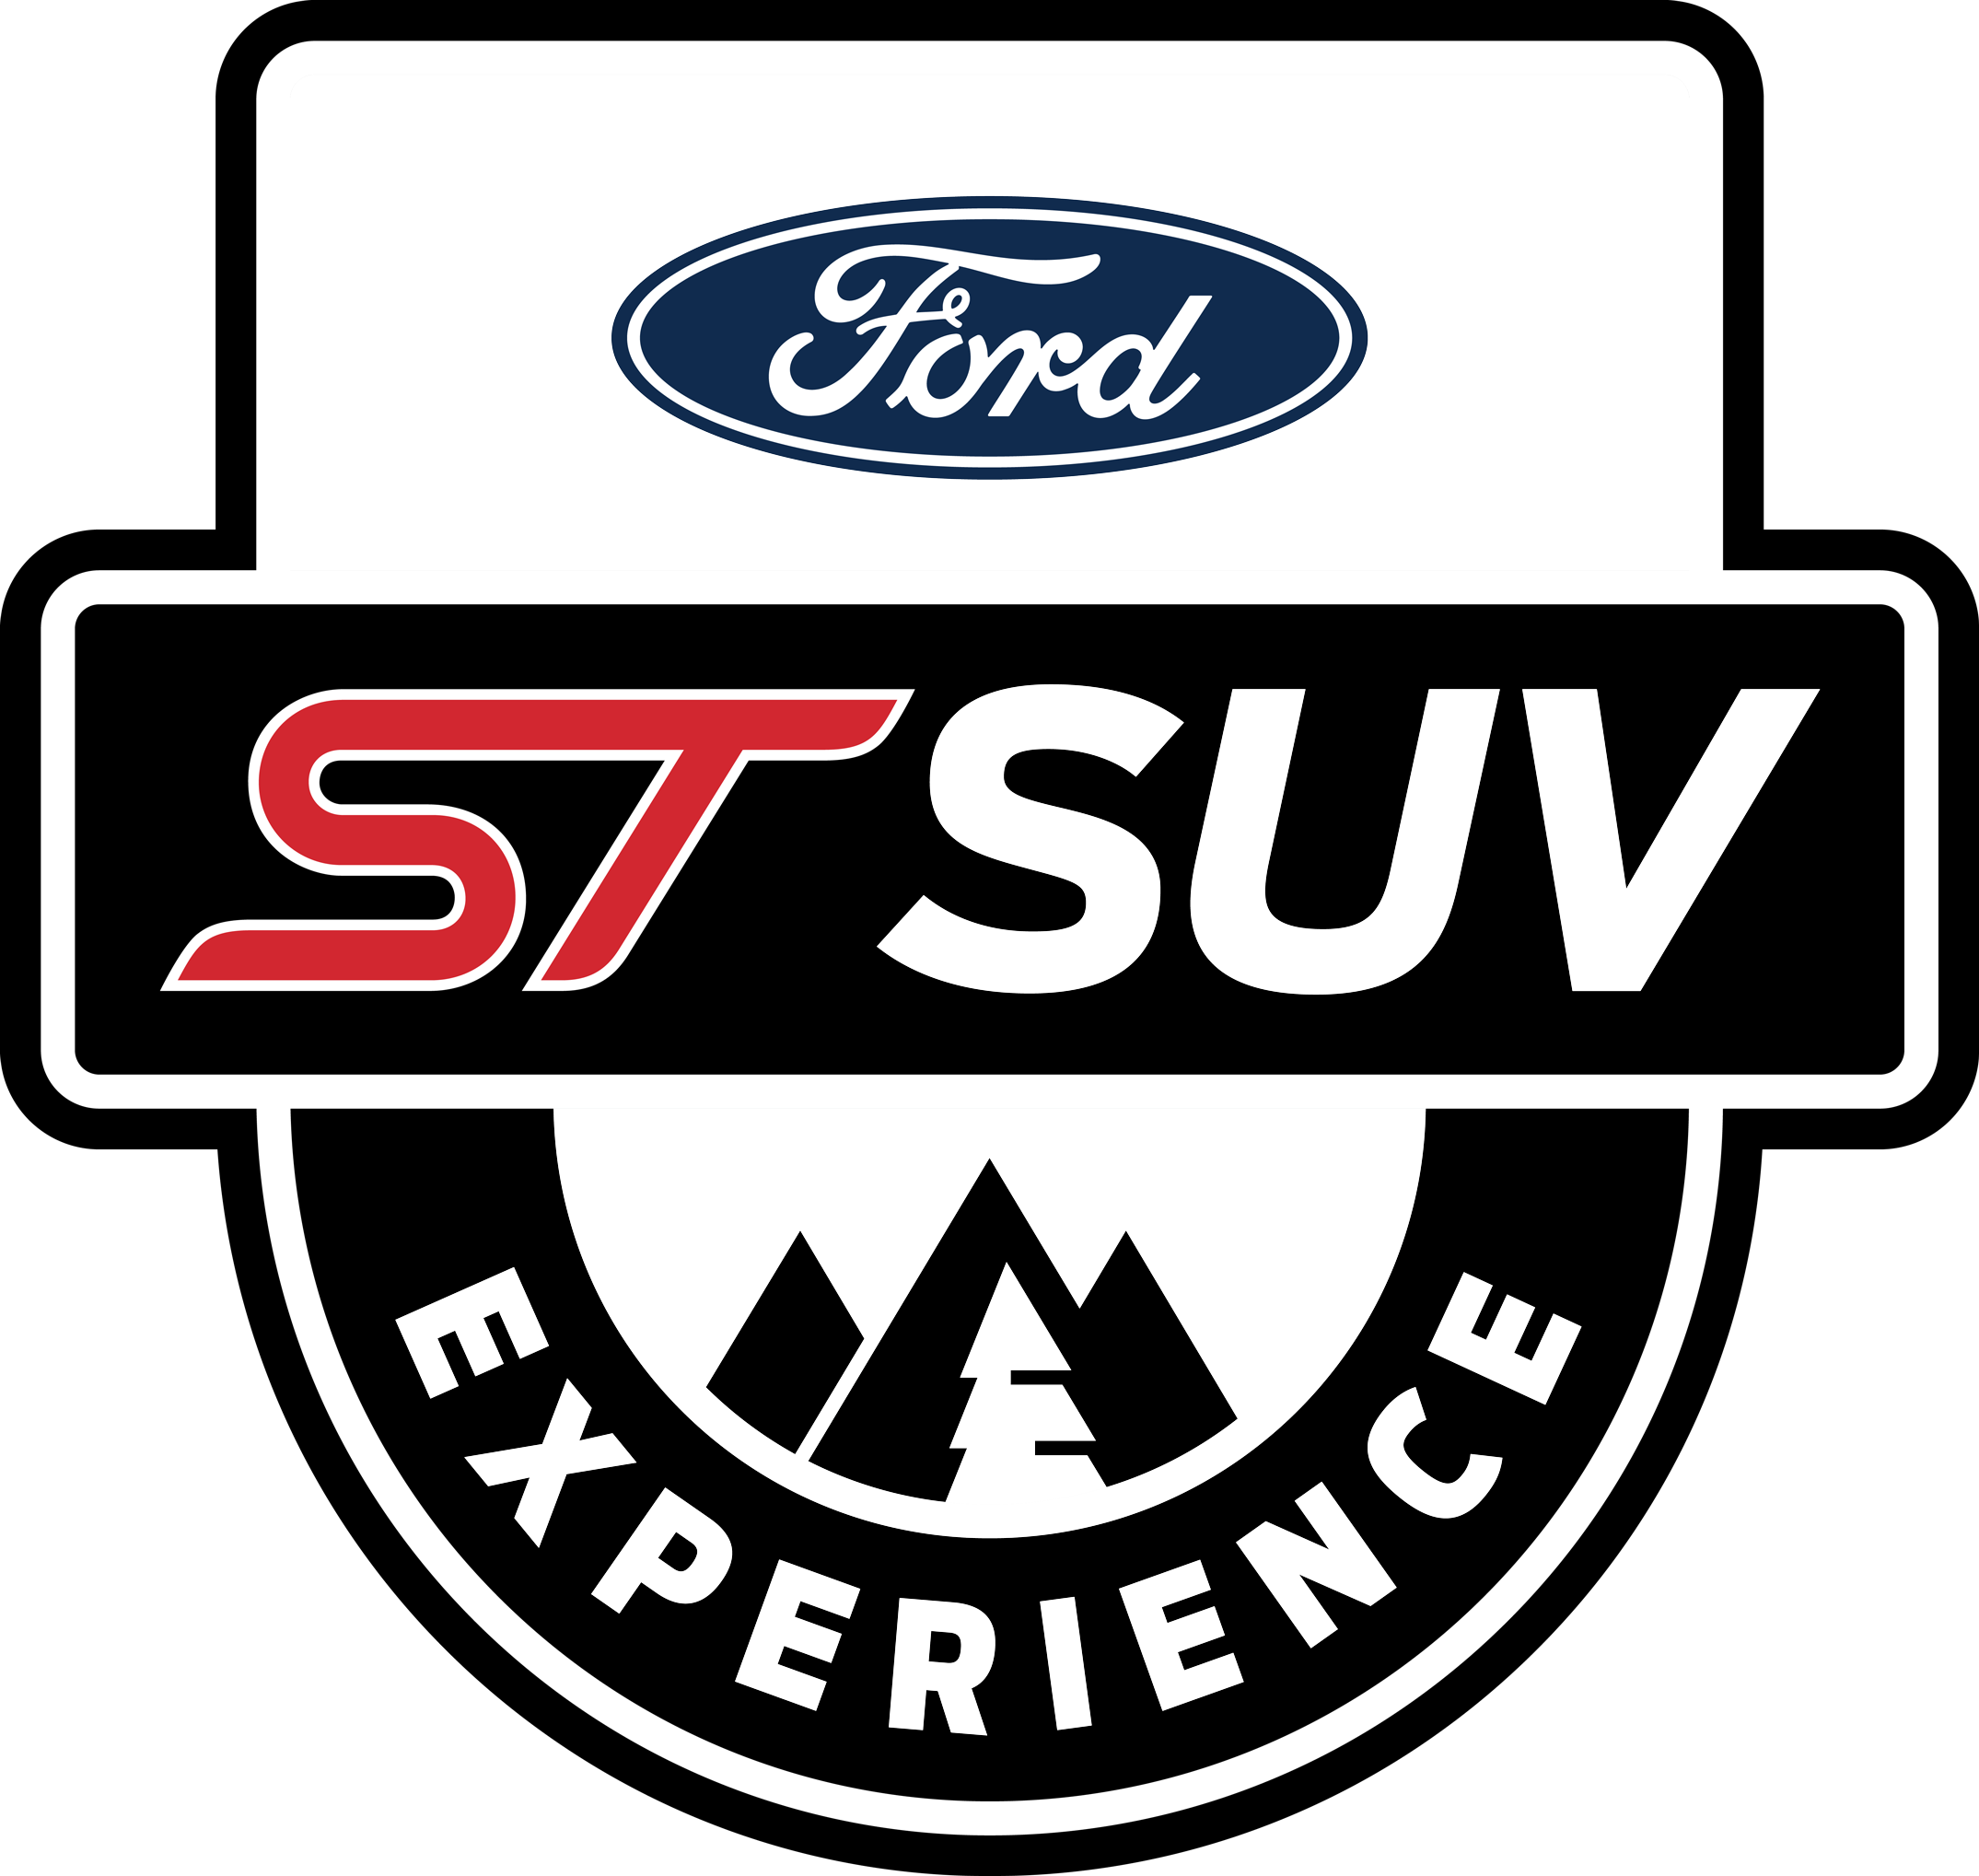 ST SUV Experience – Ford Performance Racing School